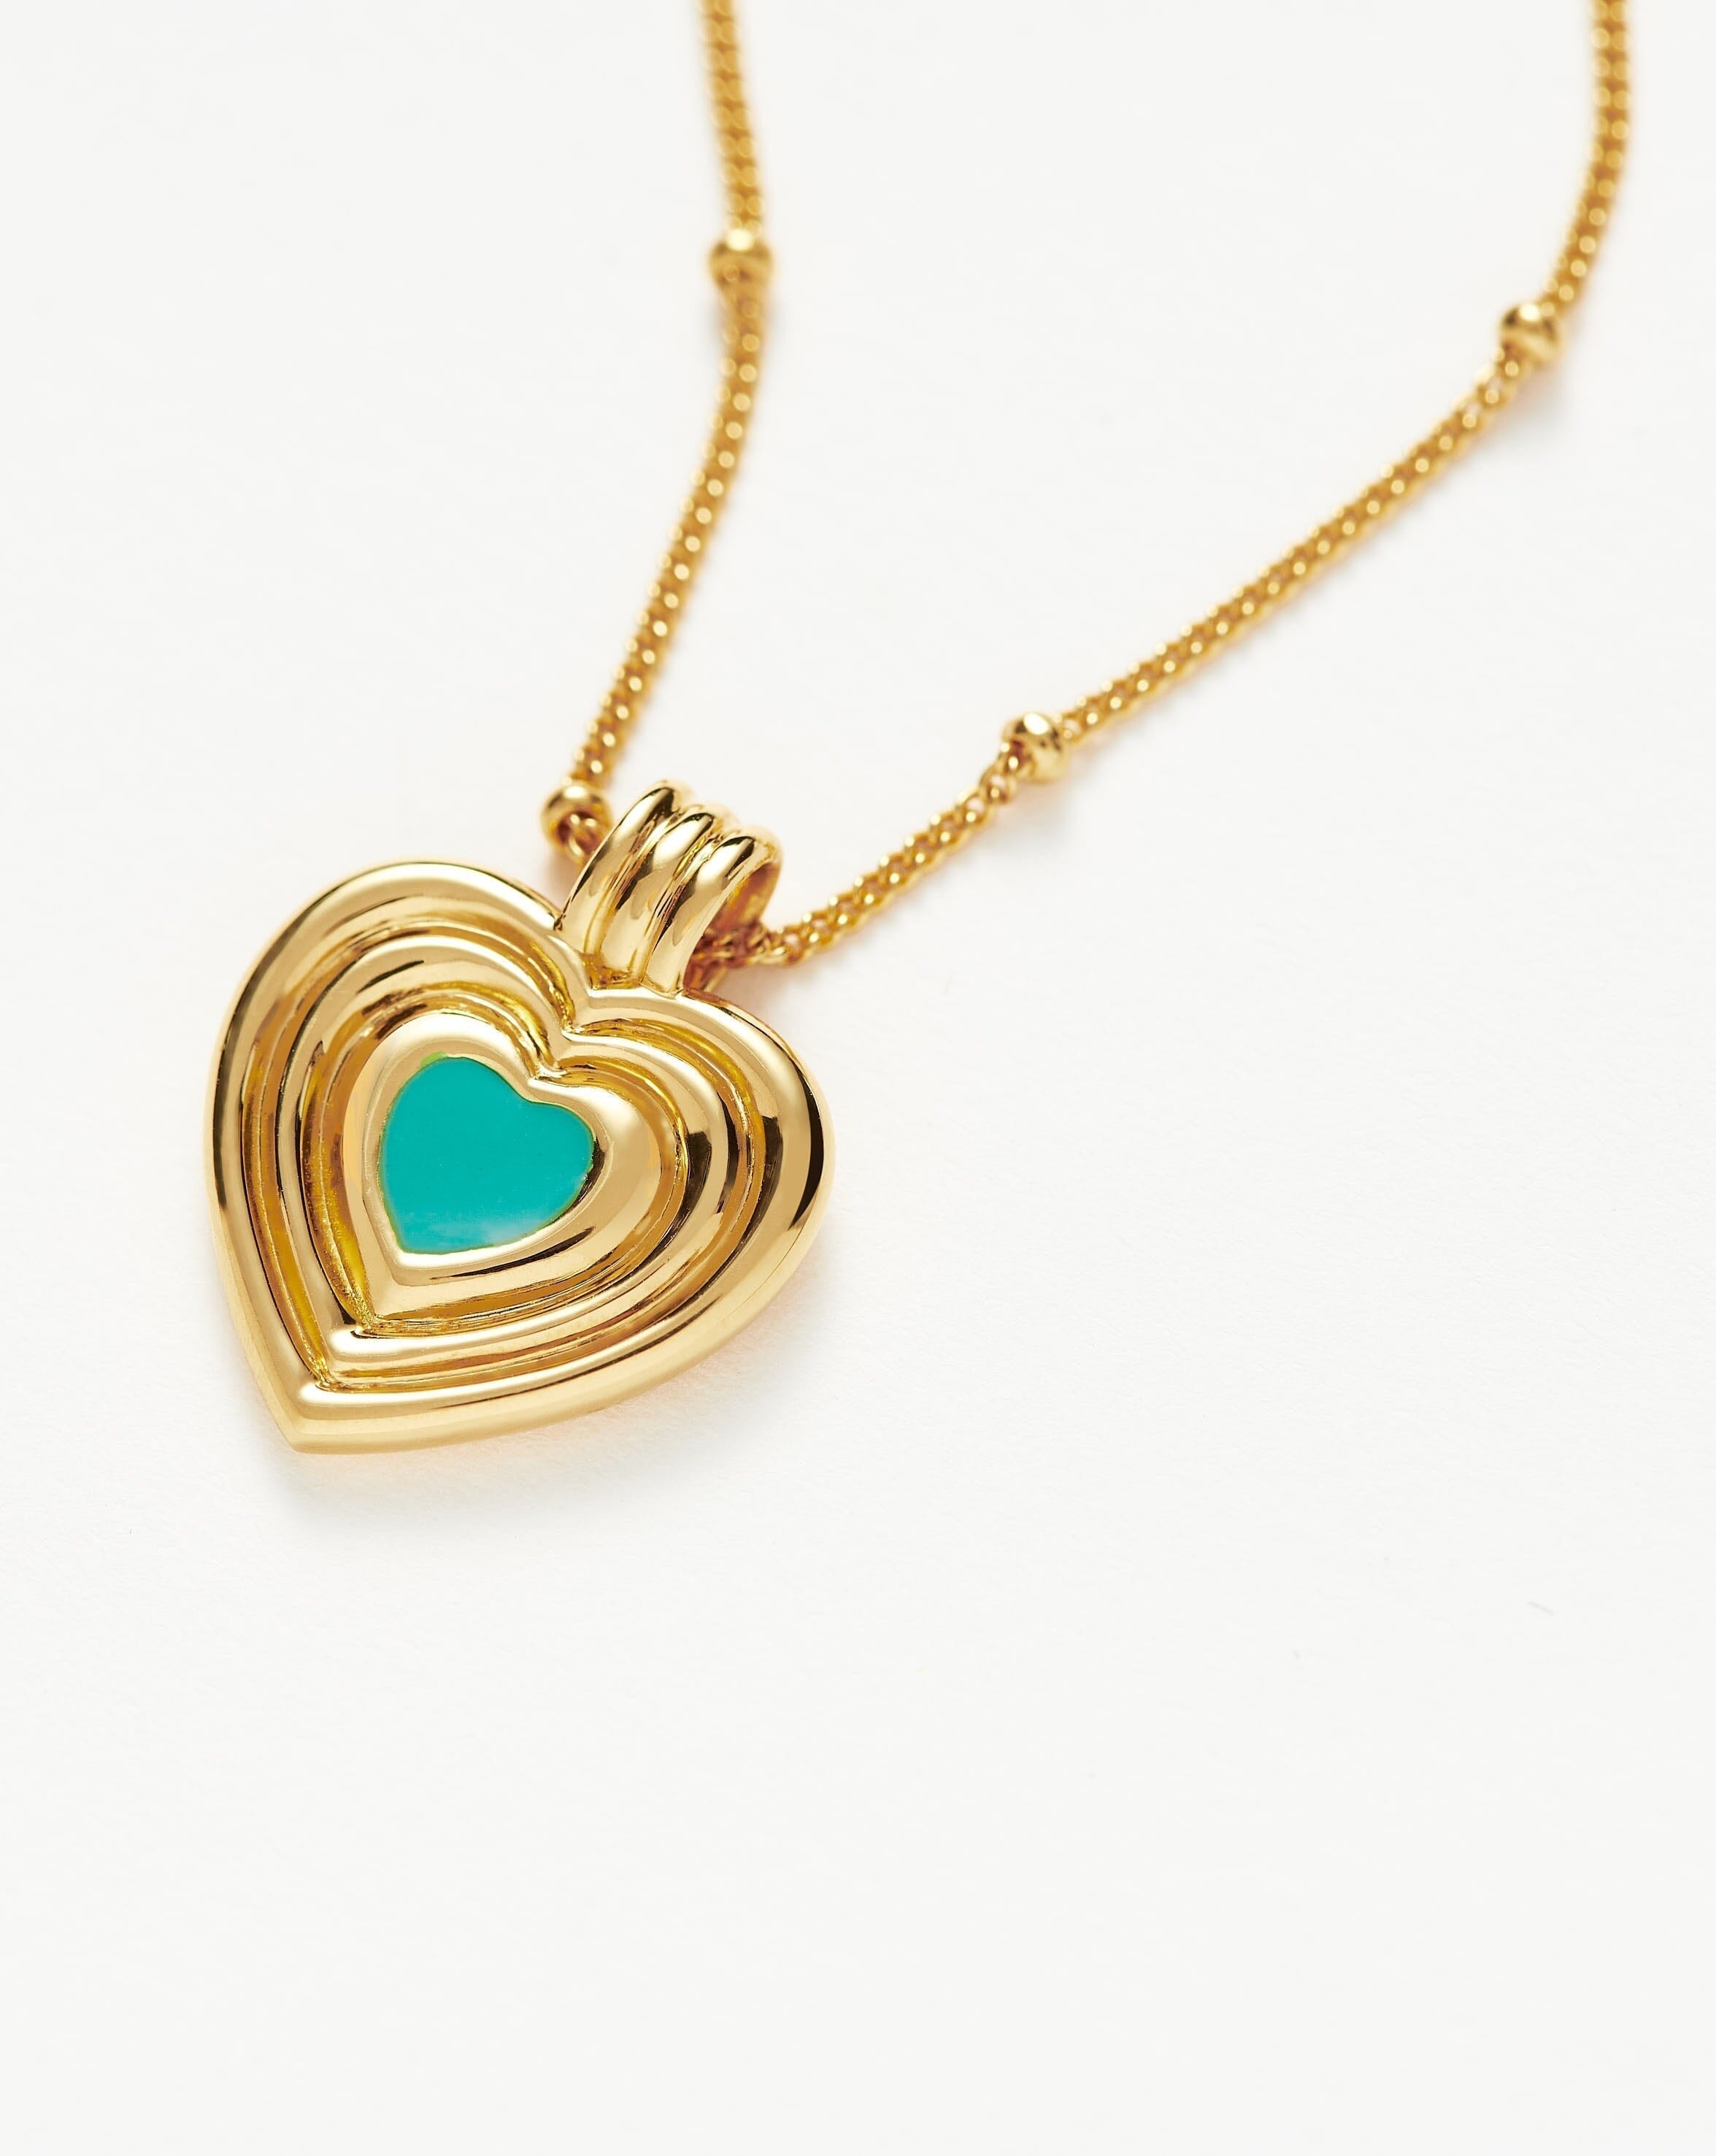 Missoma Love Heart Pendant Chain Necklace | 18ct Gold Plated Vermeil